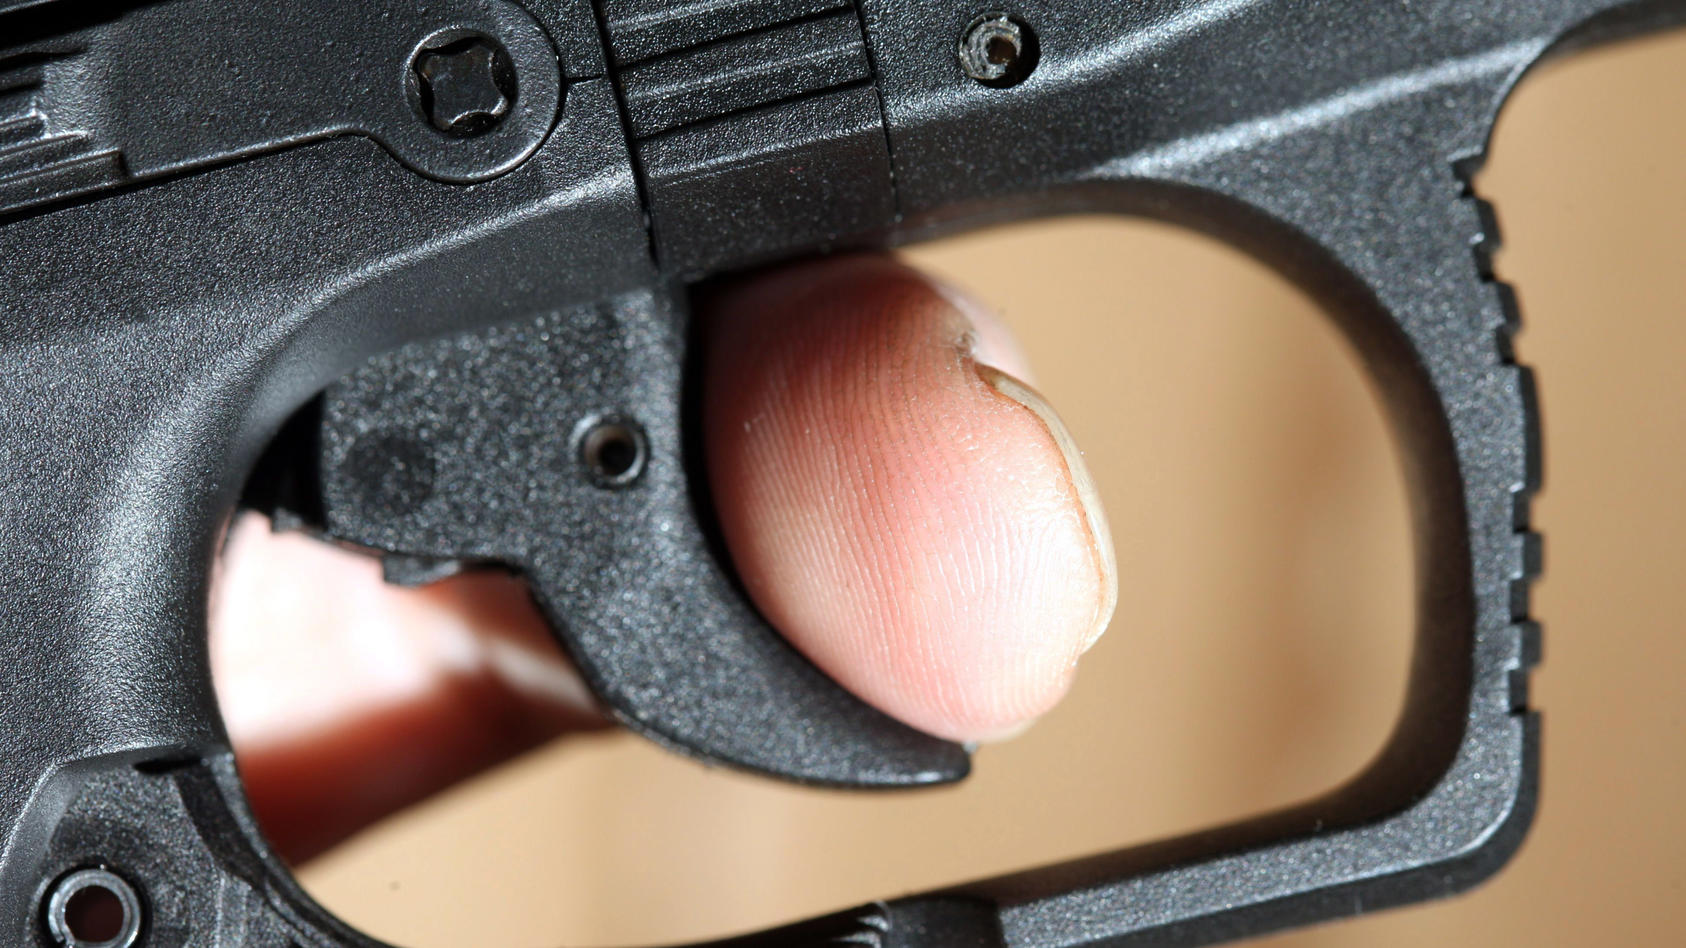 A finger on the trigger of a pistol, pictured on 21.11.2007. Foto: LEHTIKUVA / Martti Kainulainen +++(c) dpa - Report+++